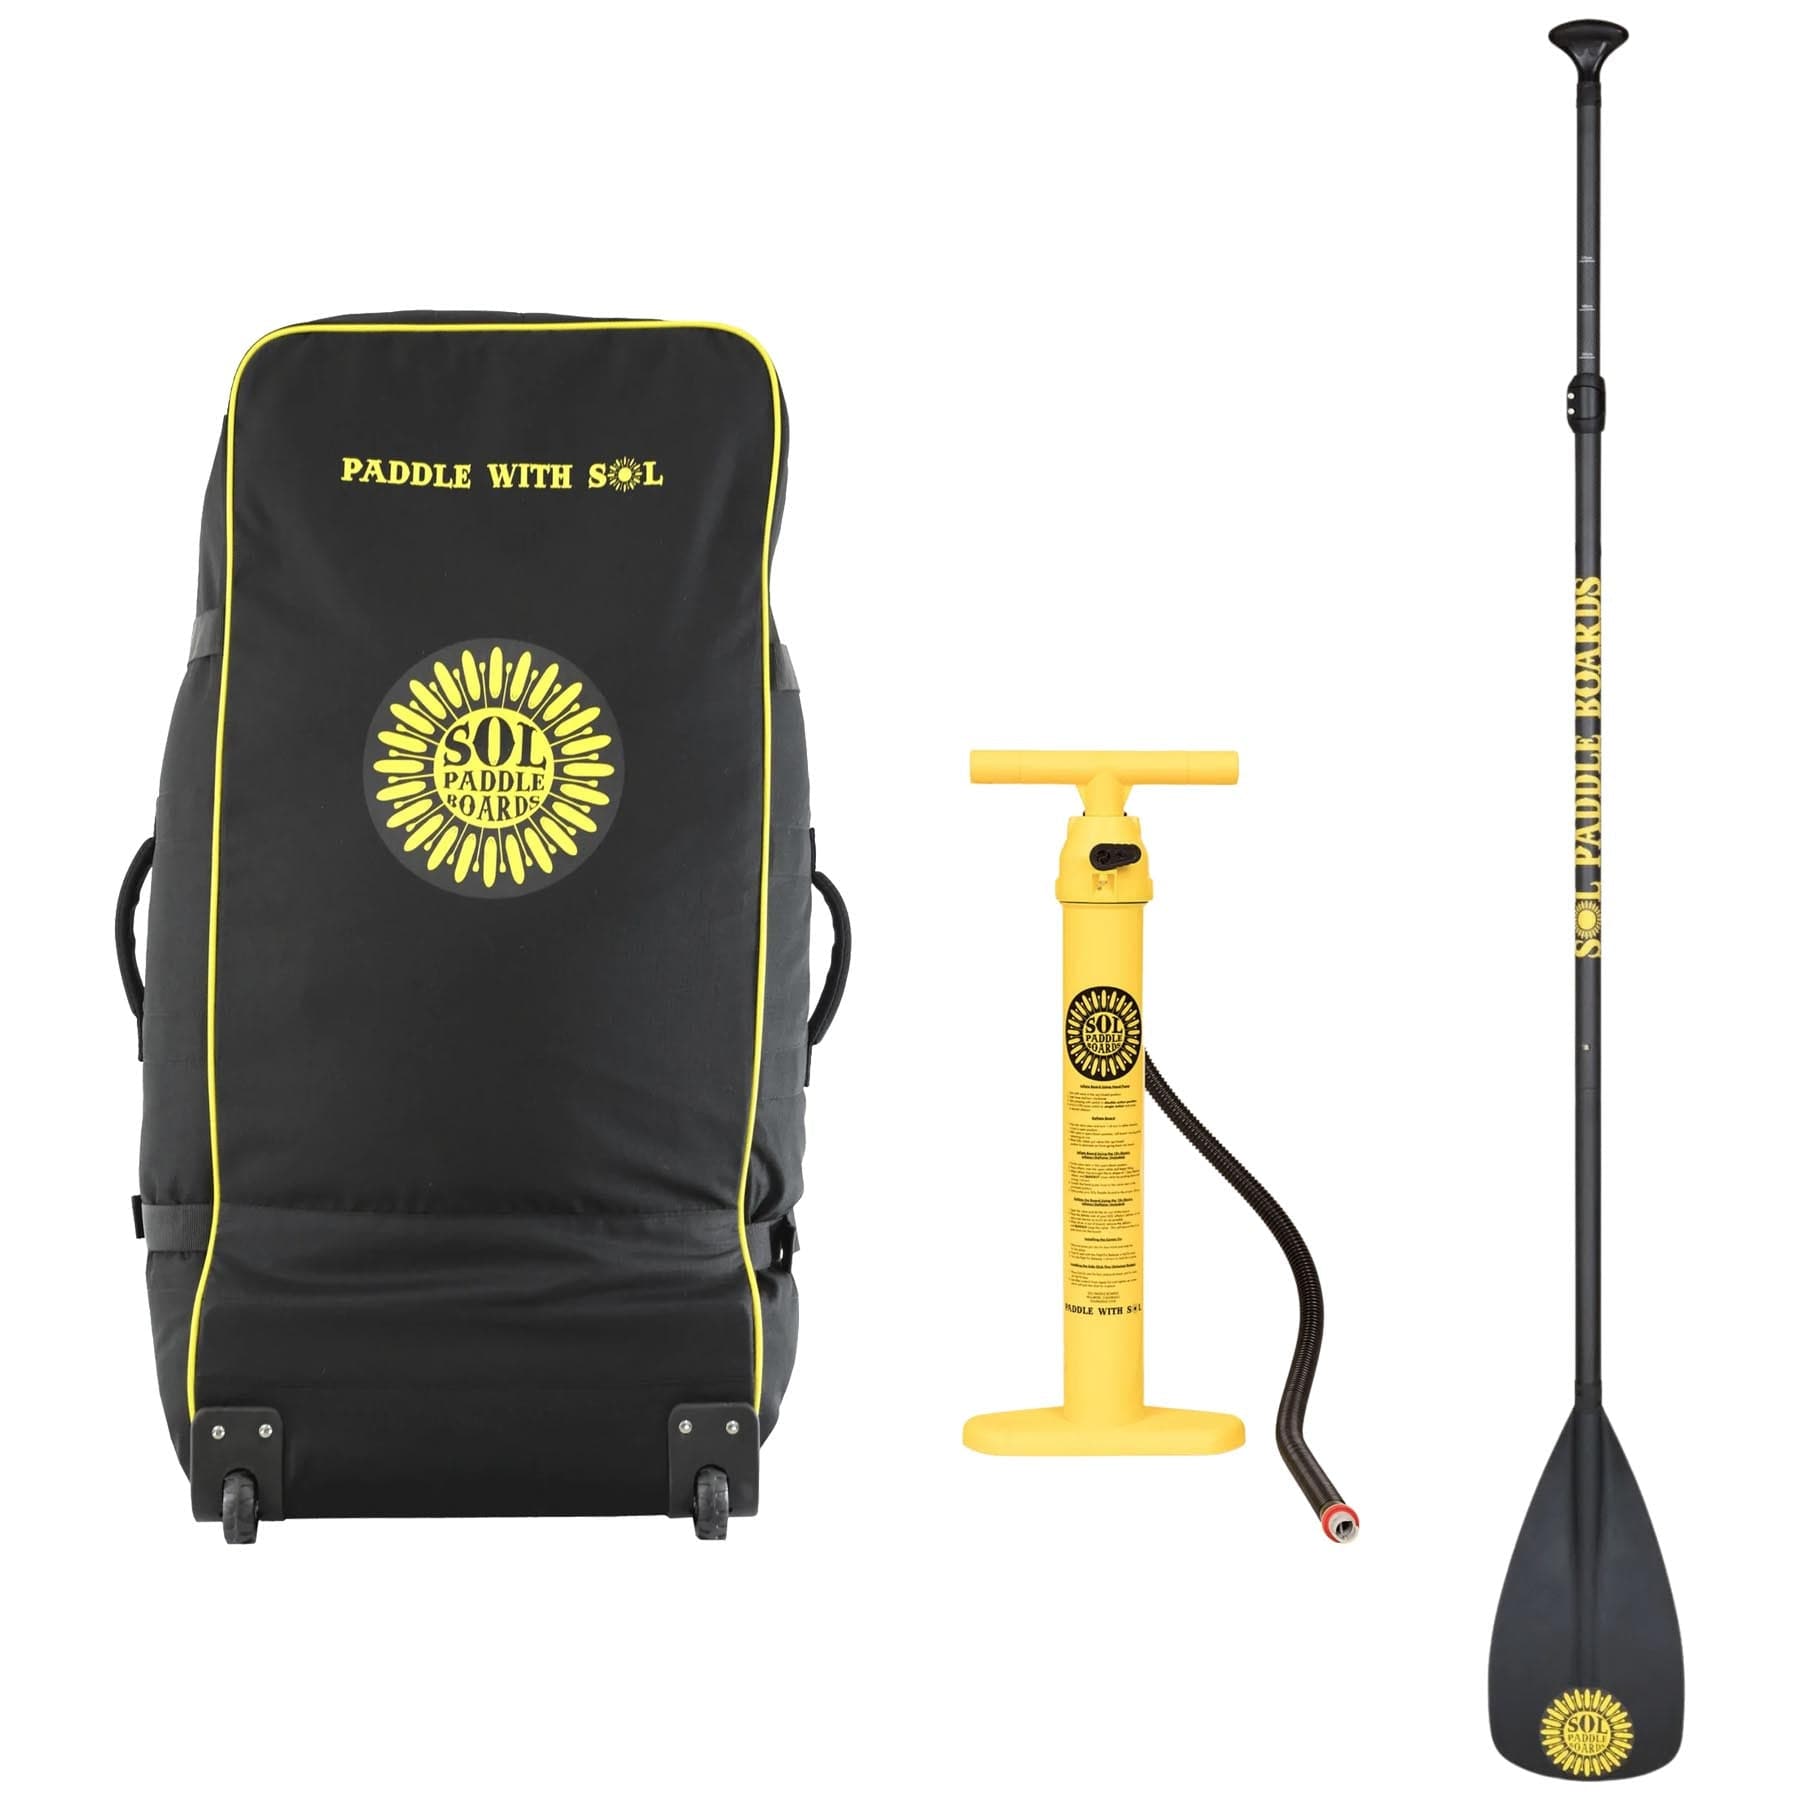 Black wheeled inflatable SOLtrain carrying bag with the SOL logo, a detached paddle, and a hand pump against a white background.